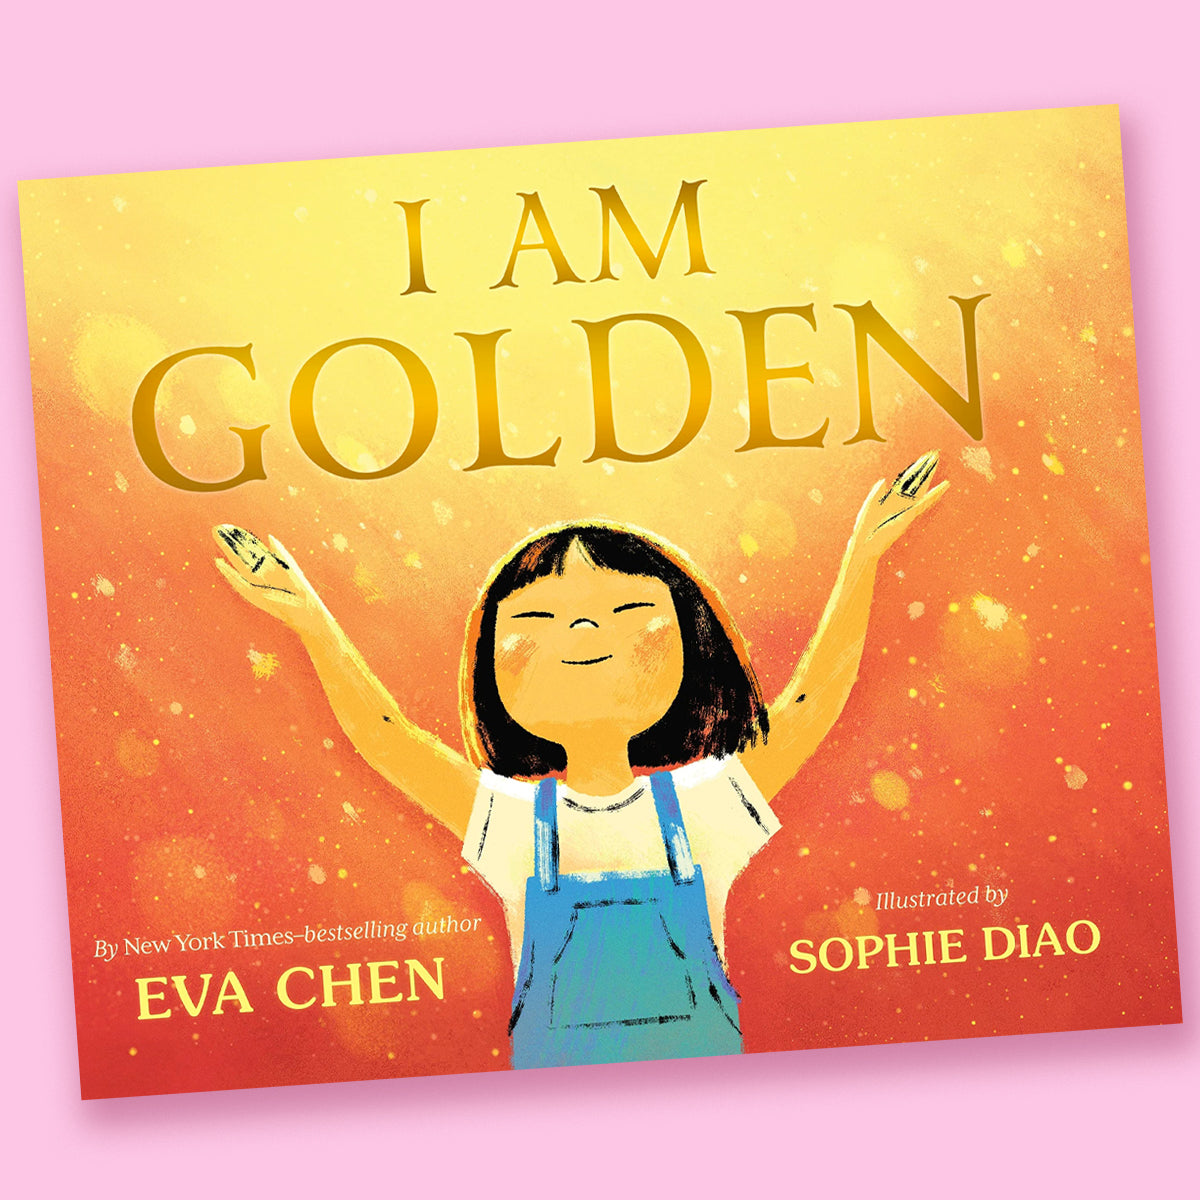 I Am Golden by Eva Chen and Sophie Diao